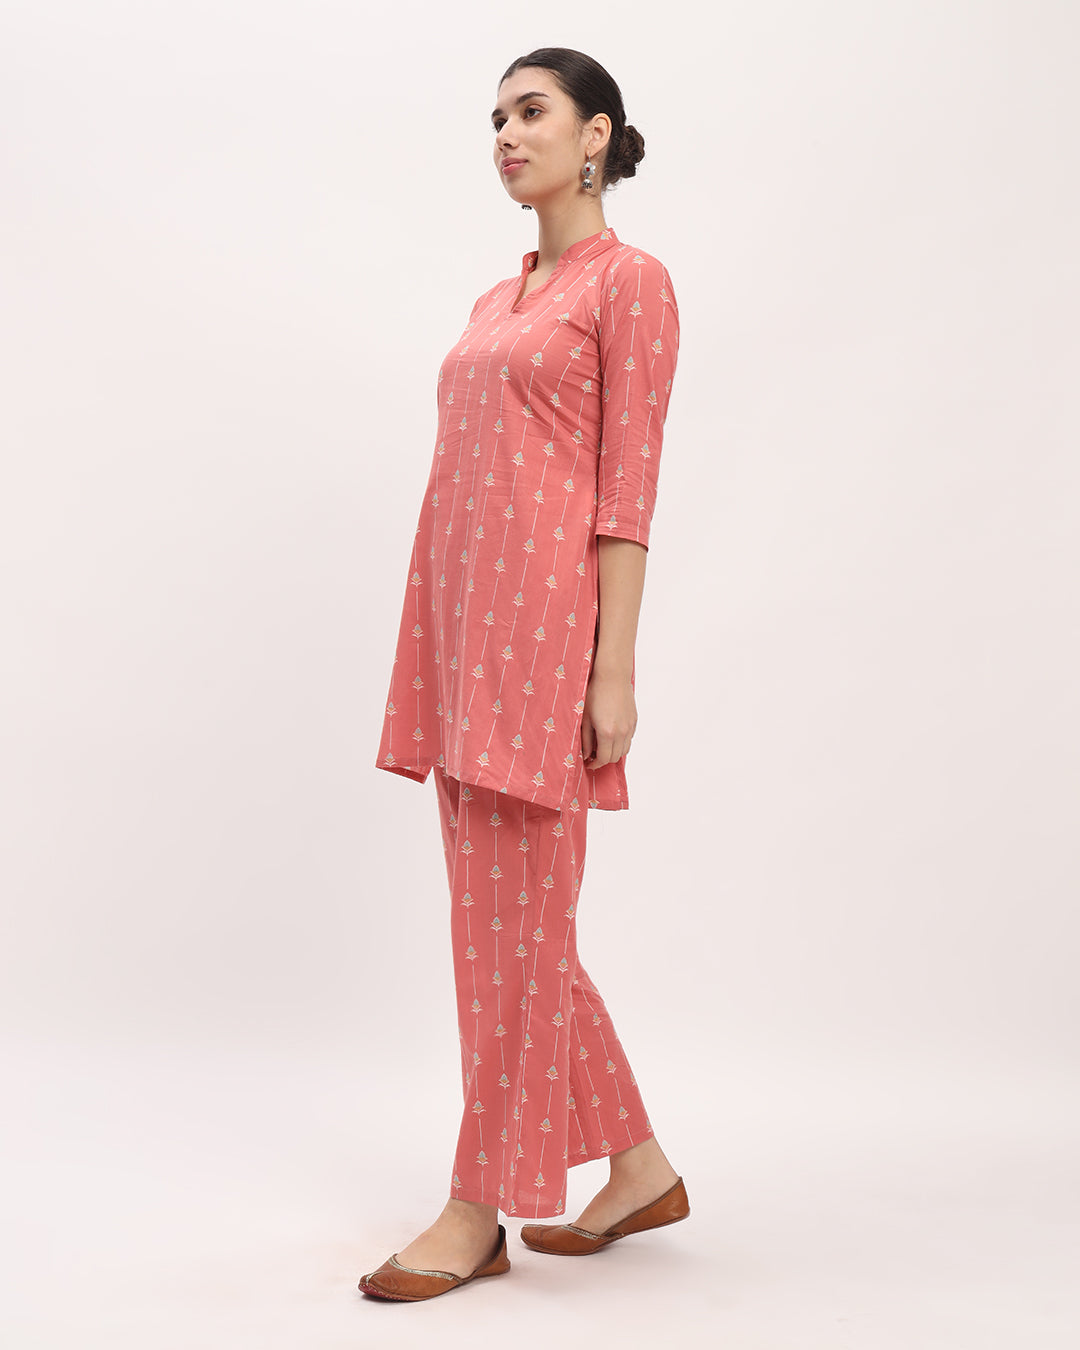 English Floral Tracks Mid Length Printed Kurta (Without Bottoms)